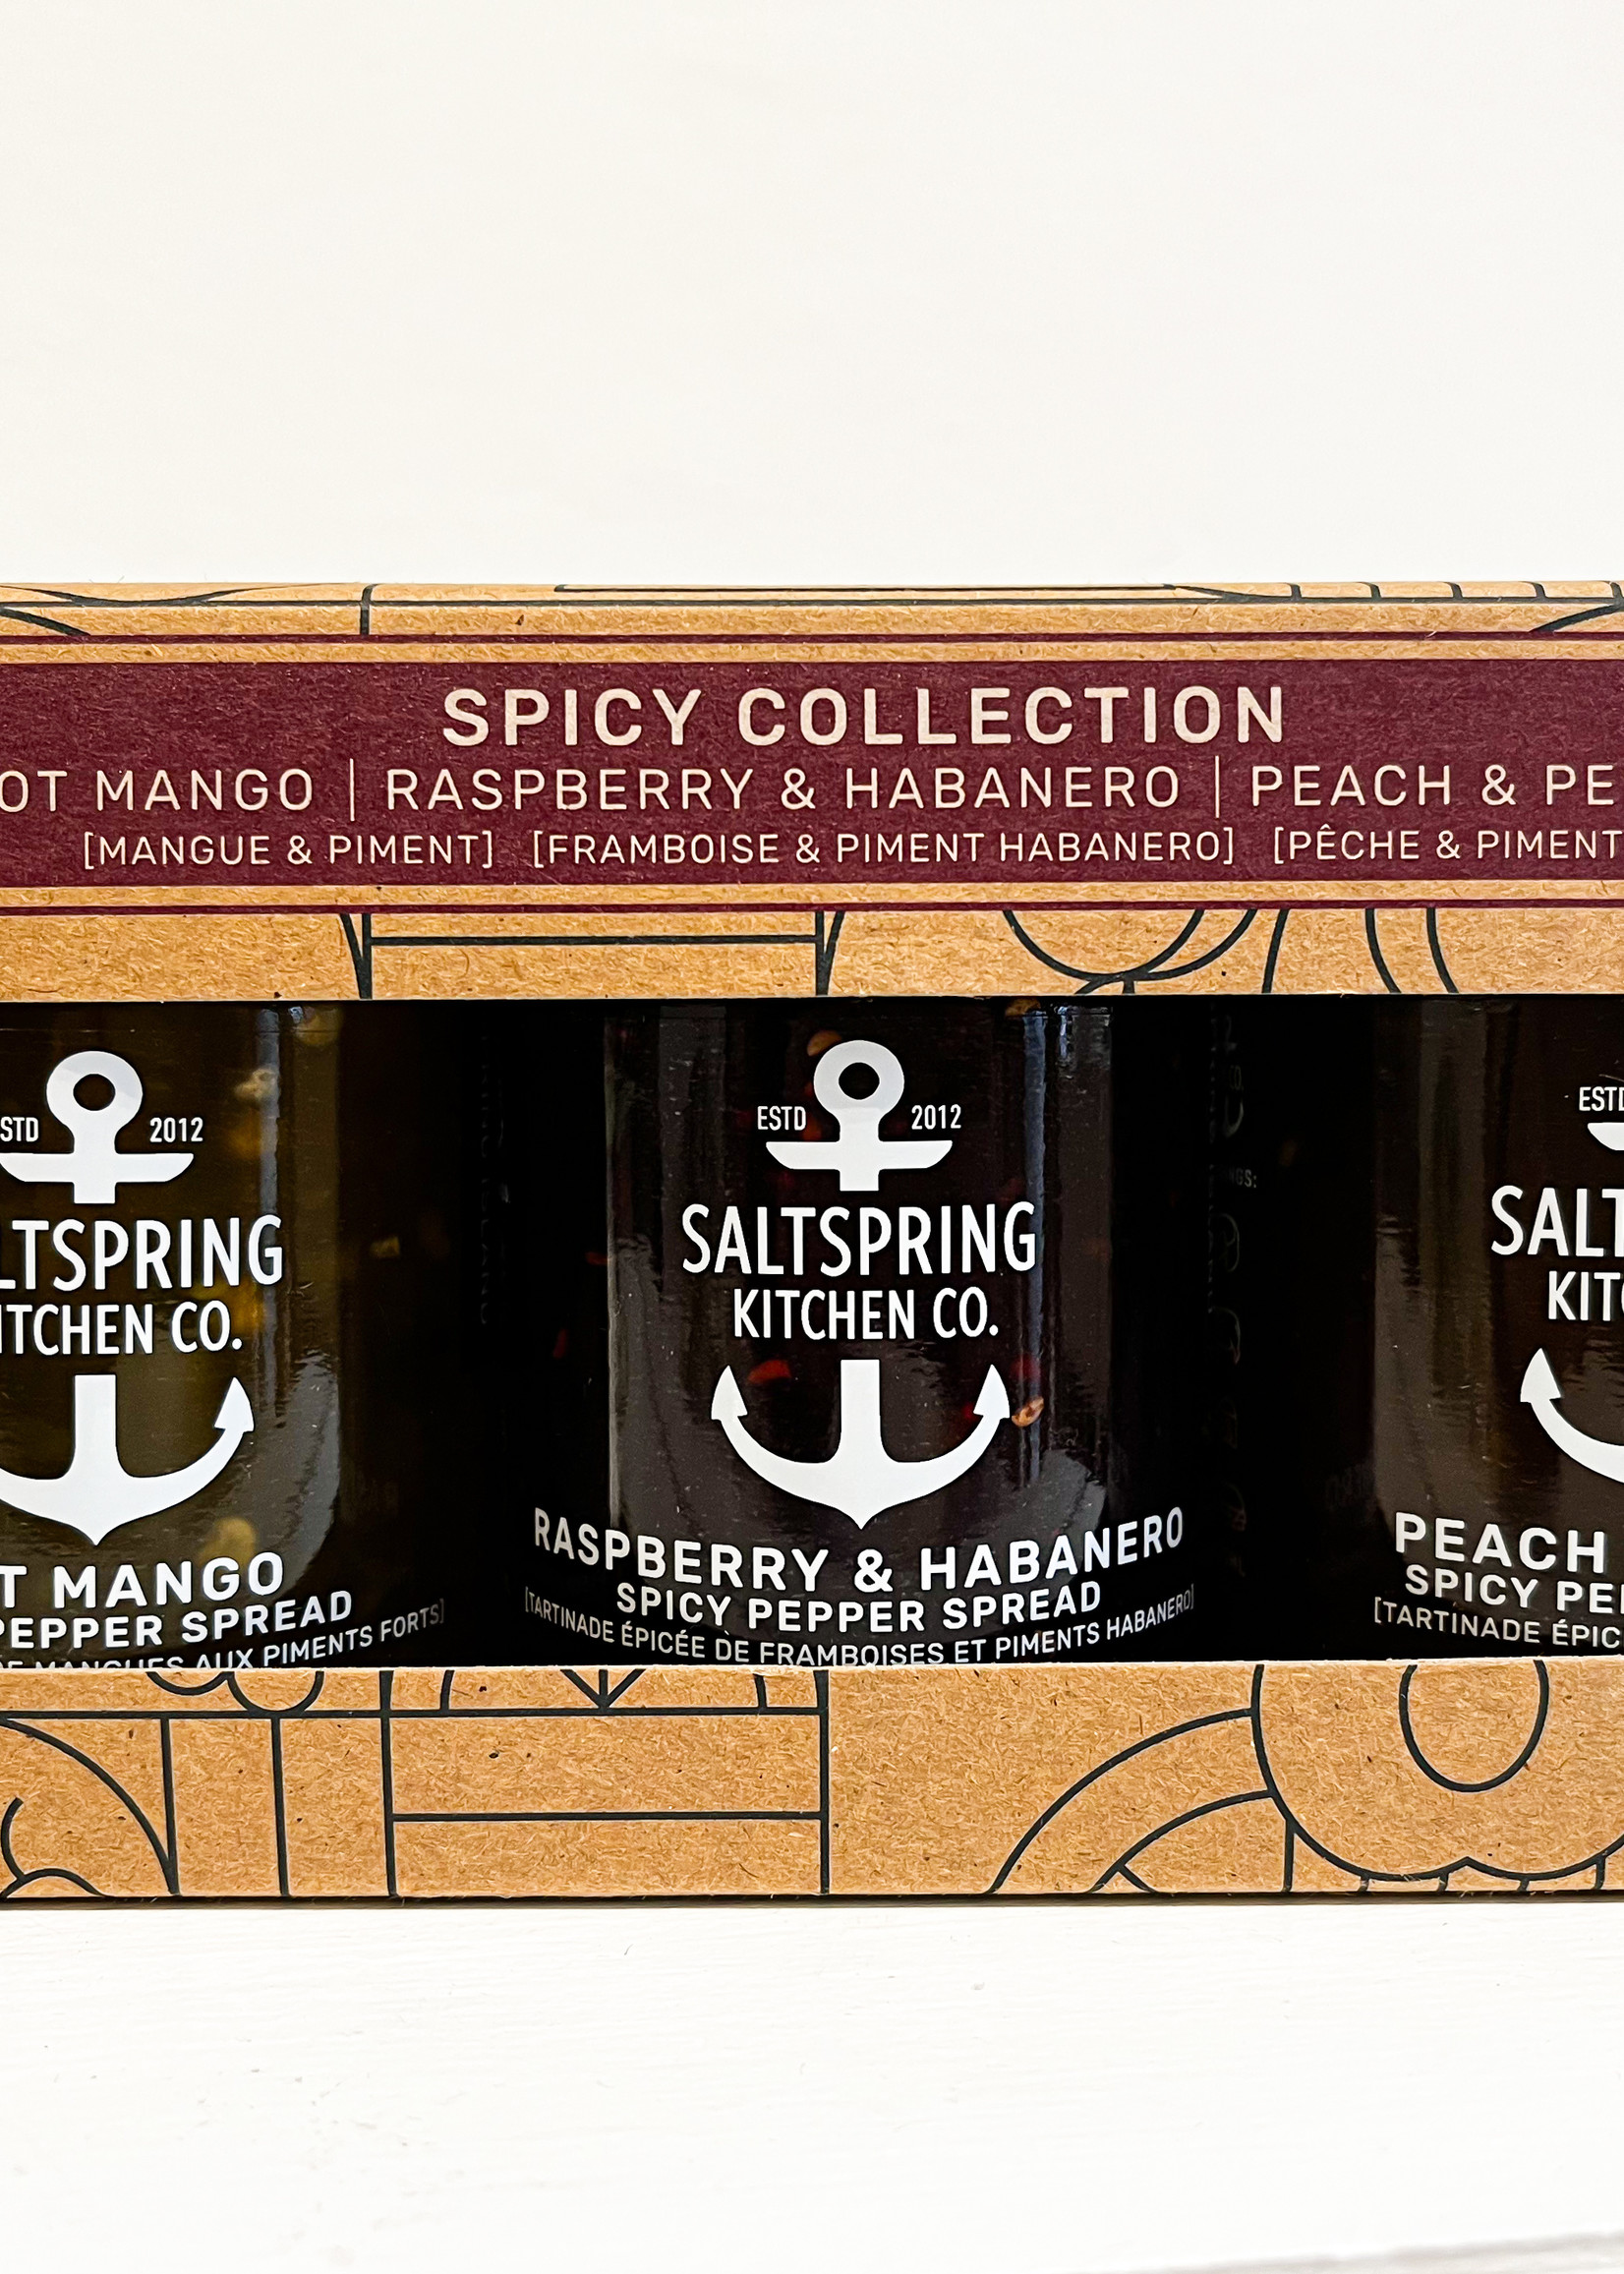 Saltspring Kitchen Co. Saltspring Kitchen Co  - Spicy Collection